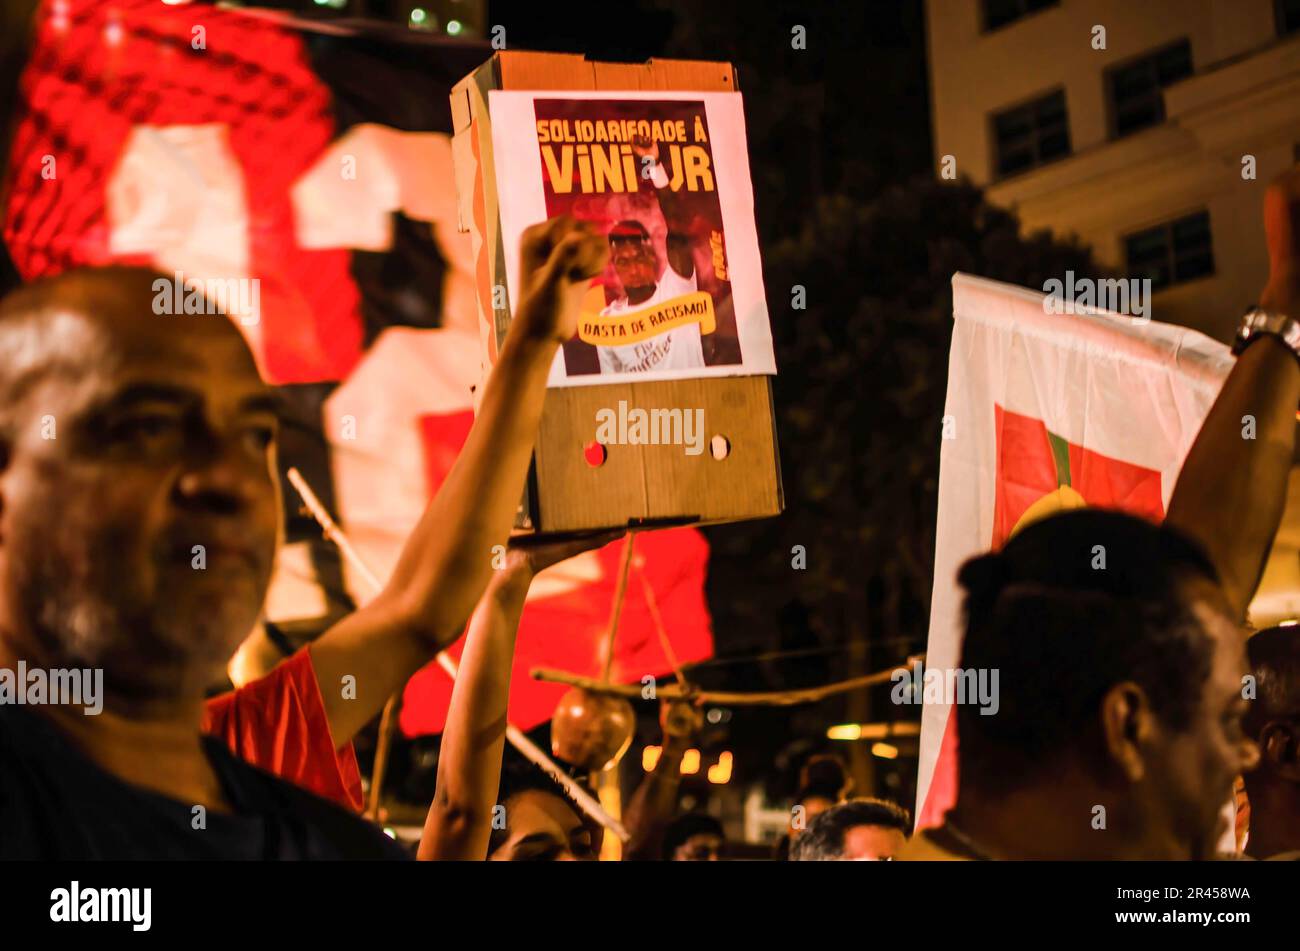 Rio de Janeiro, Brazil. 25th May, 2023. A protester holds a picture of Vinicius J?nior during the demonstration. Manifestation in Rio de Janeiro city, in solidarity to Real MadridÂ´s player VinÃ-cius JÃºnior, who suffered racism in Spain during a game against Valencia team, on Sunday (21). VinÃ-cius Jr. was a victim of racism and violence, when he was called out as ''˜mono' (translation to ''˜monkey') by several football fans and opponent players while the match happened. He was later kicked out of the match. Vinicius Junior already has eight cases of racism still in process by La Liga. (Cre Stock Photo